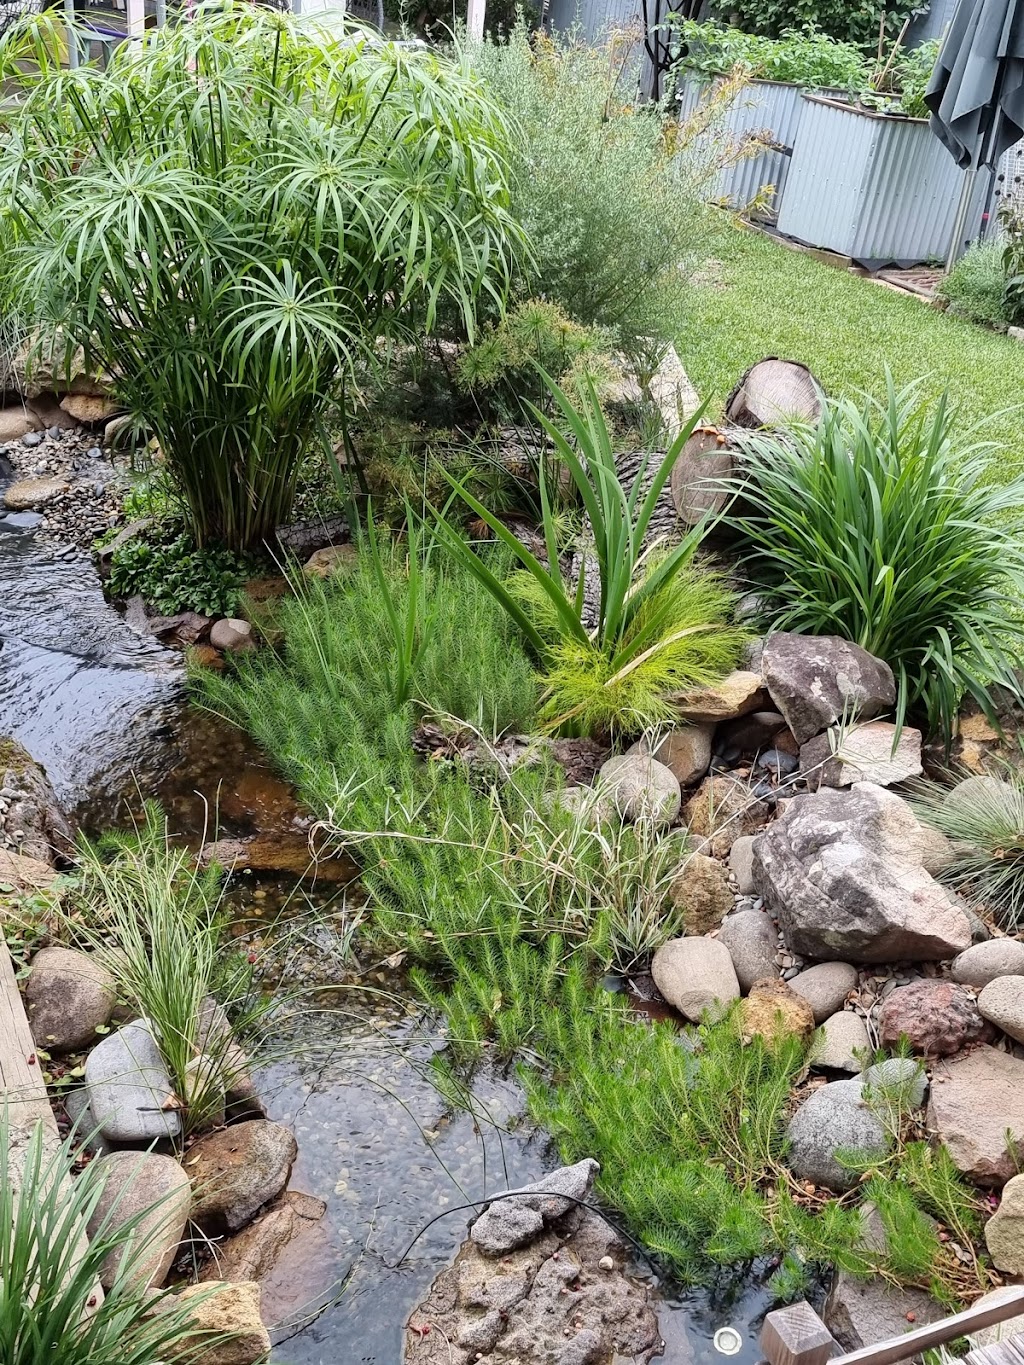 Anything Wet - Ponds & Water Features | pet store | 66 Watagan Forest Dr, Jilliby NSW 2259, Australia | 0415165897 OR +61 415 165 897